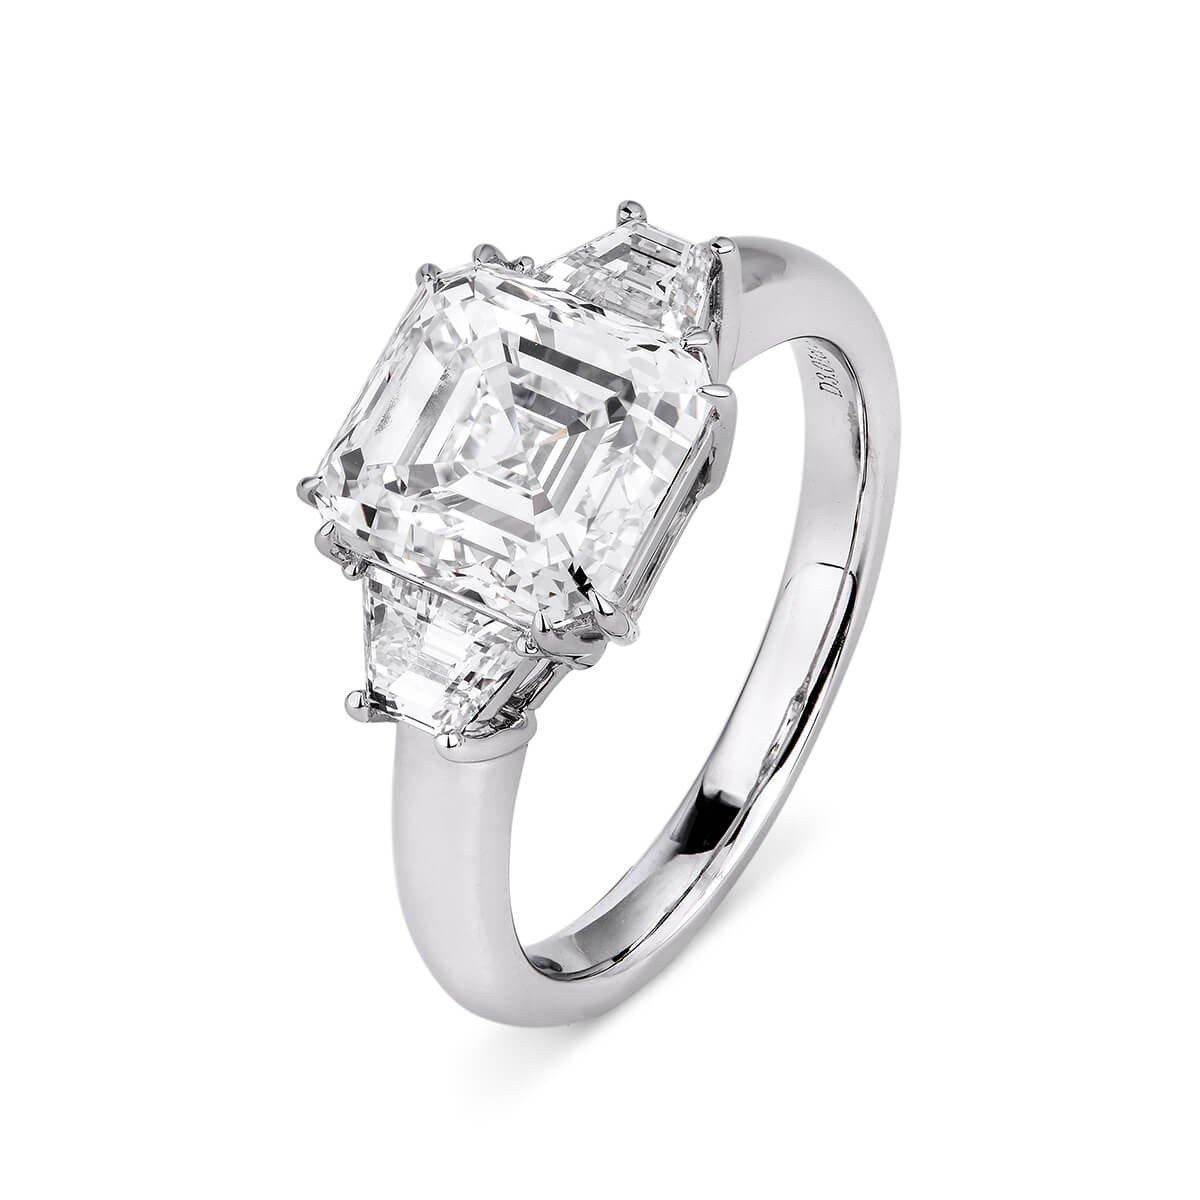 ASHER CUT DIAMOND RING - 3.58 CT


Set in 18KT White gold


Total diamond weight: 3.01 ct

[ 1 diamond ]
Color: E
Clarity: SI1

Total side diamond weight: 0.57 ct
[ 2 diamonds ]
Color: F
Clarity: VS

Total ring weight: 4.27 grams


GIA Certified